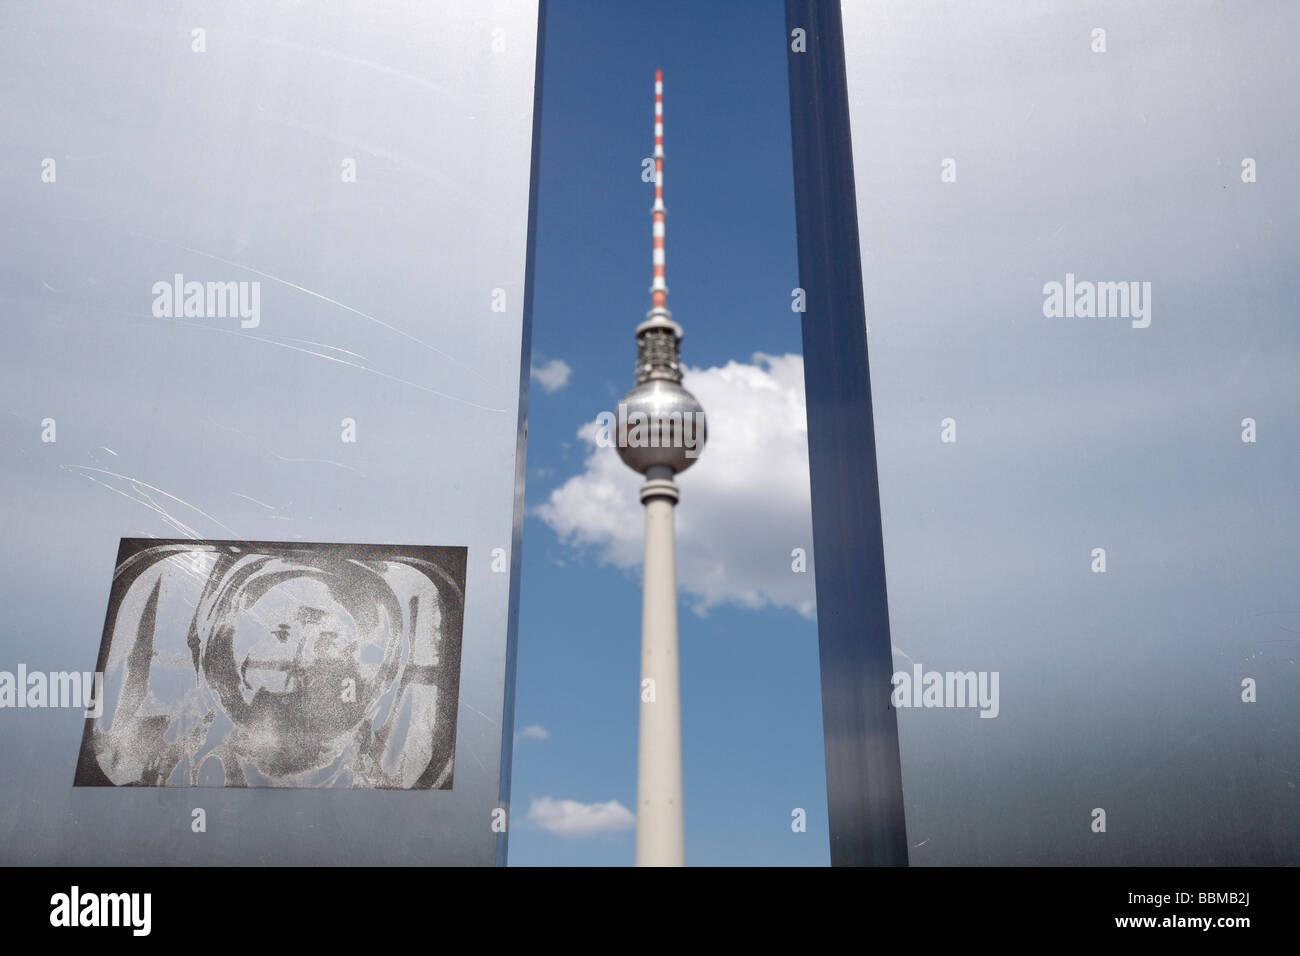 Fernsehturm TV tower and information panels of Marx Engels Forum, Berlin, Germany, Europe Stock Photo